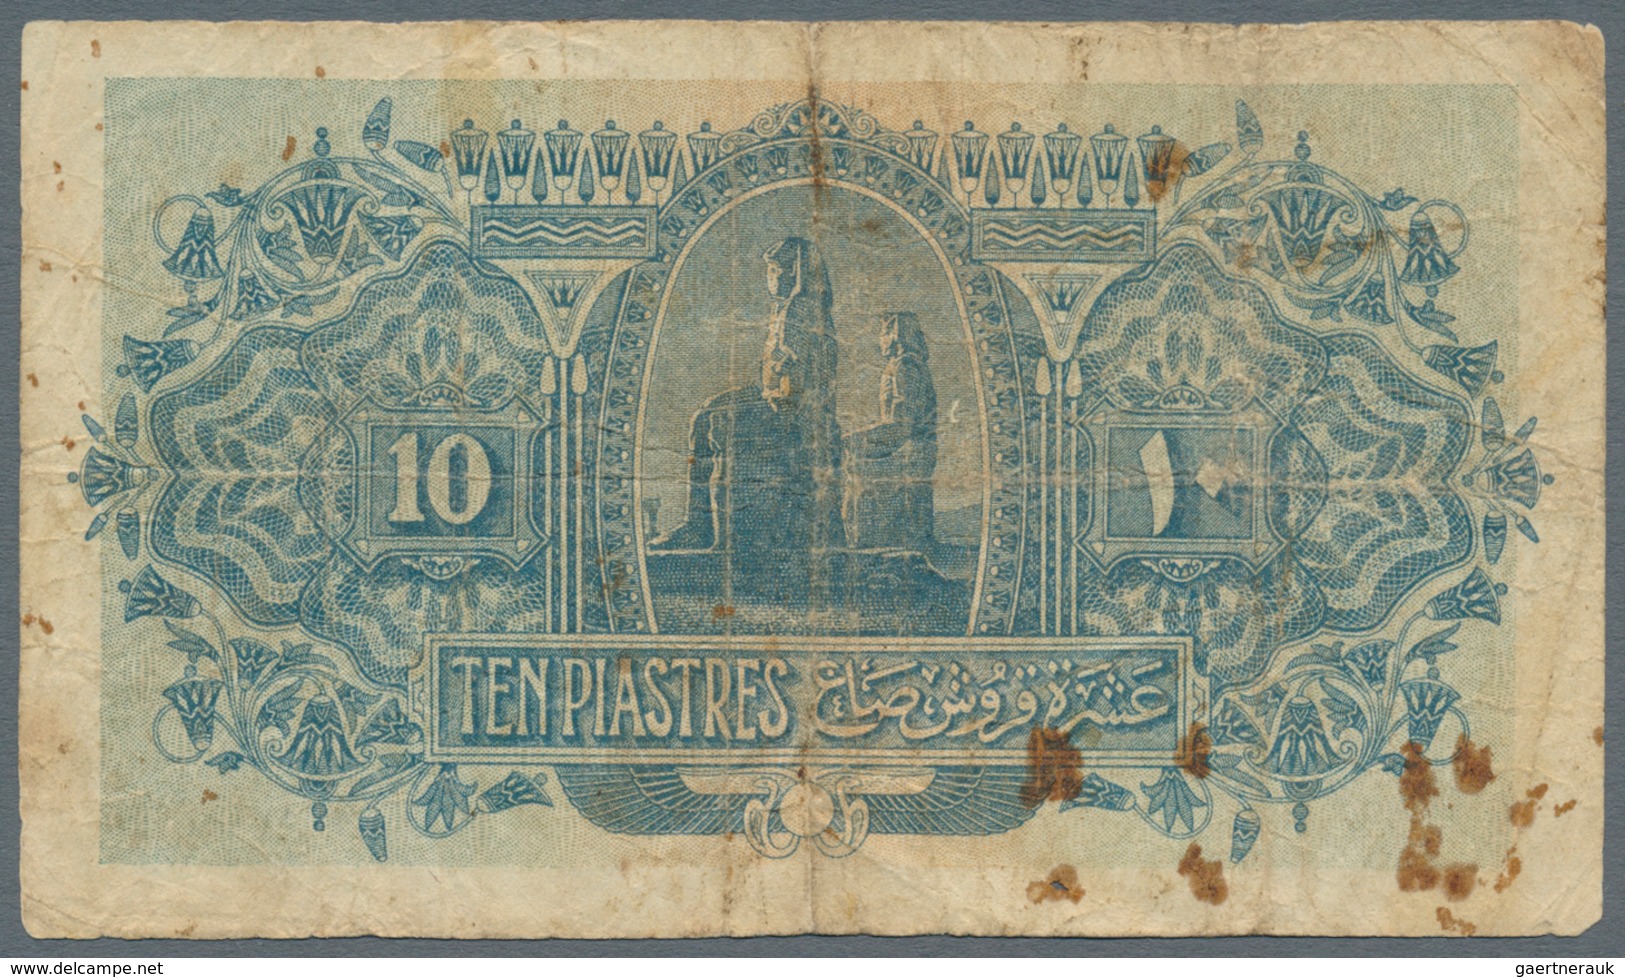 Egypt / Ägypten: 10 Piastres May 27th 1917, P.160b, Lightly Yellowed Paper With Some Rusty Pinholes - Egipto